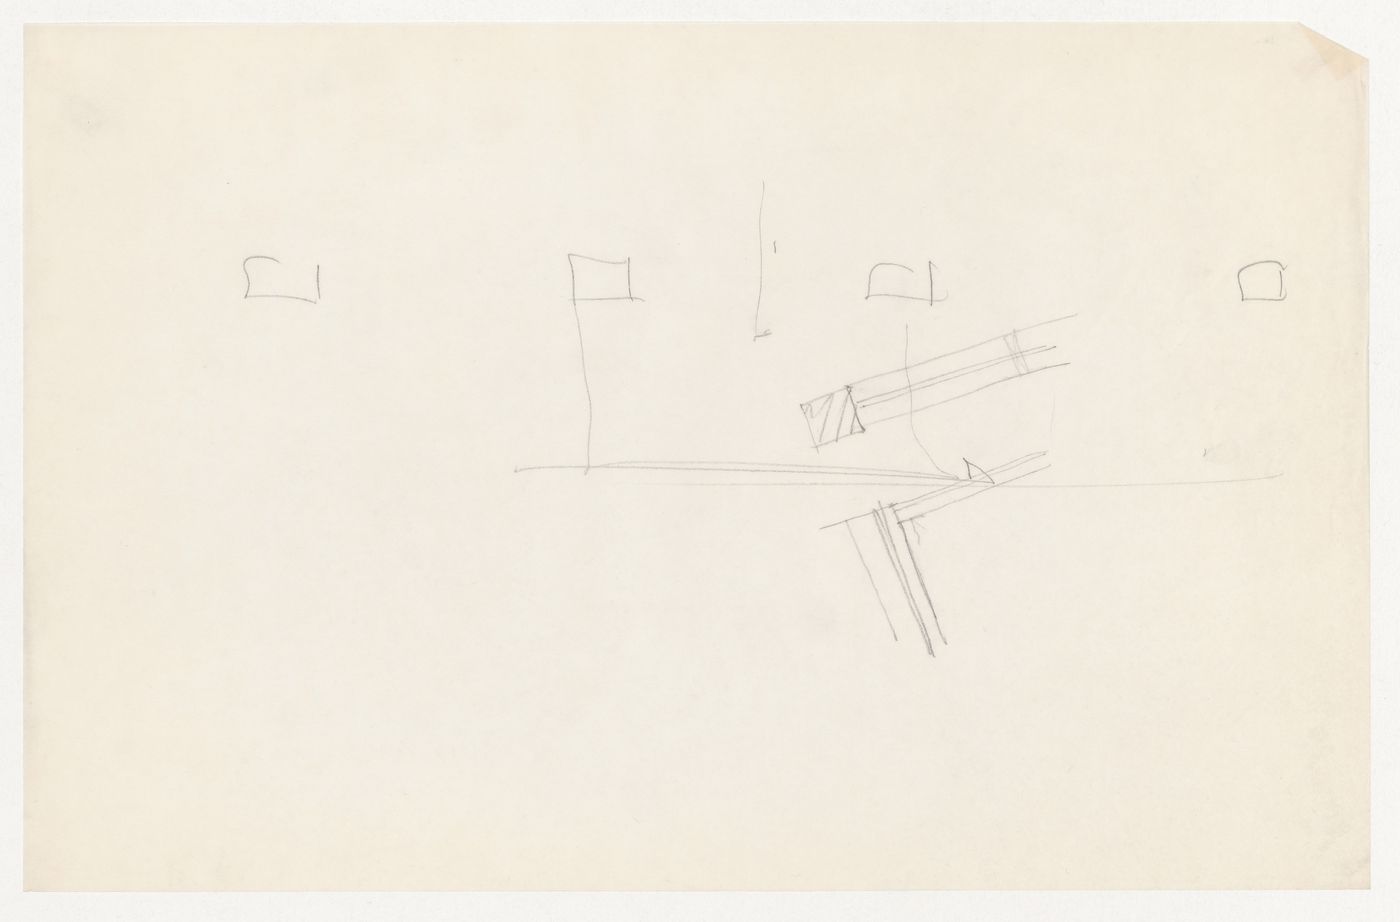 Partial sketch elevation and partial sketch plan for a window mullion ...